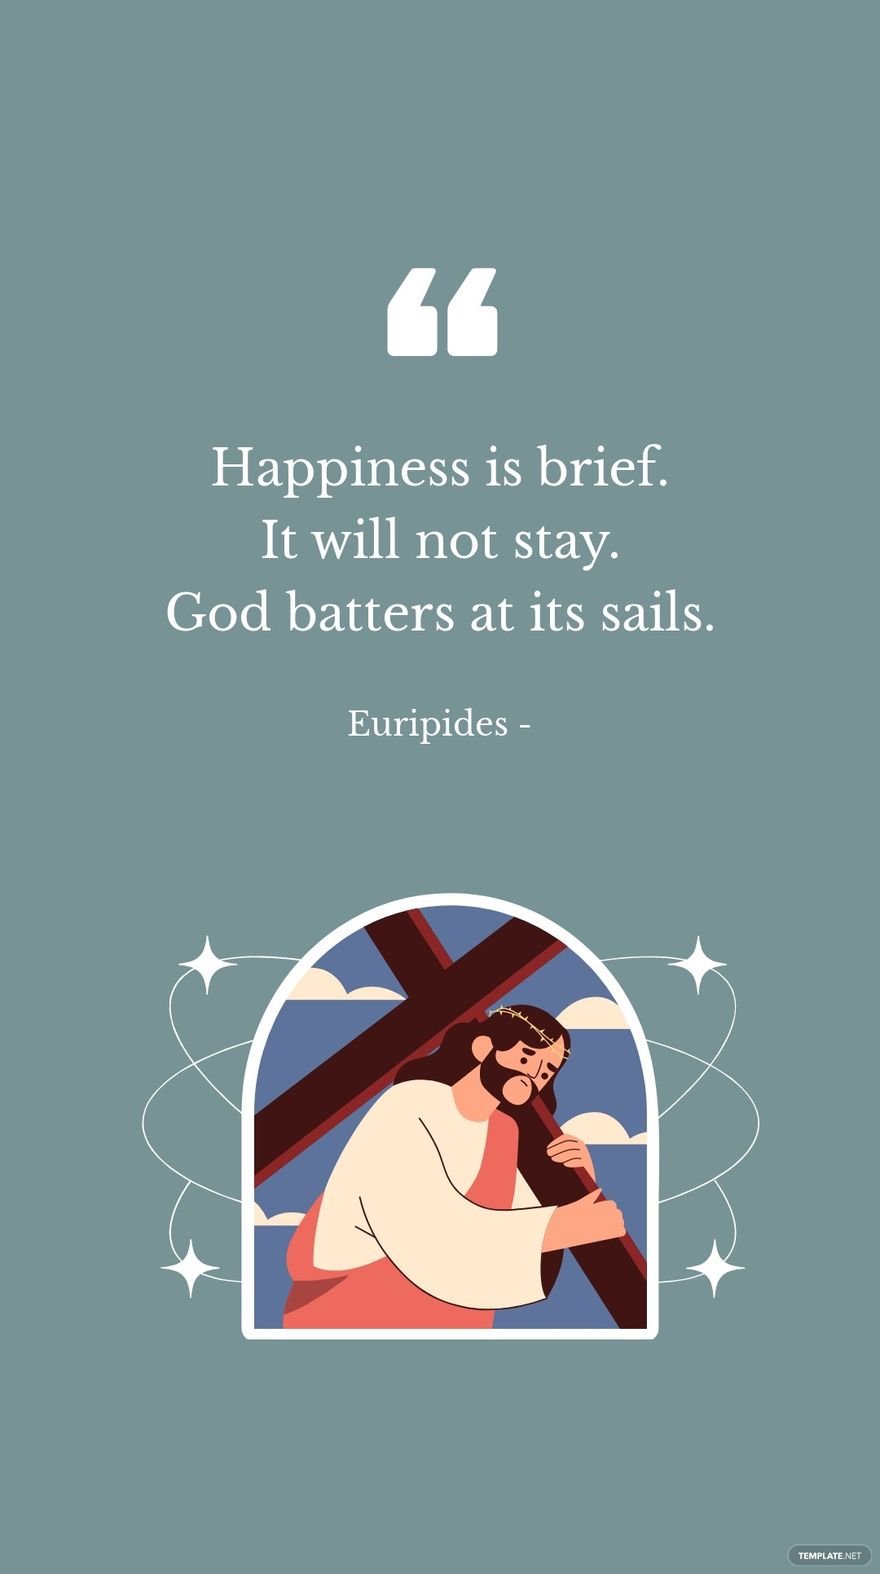 Euripides - Happiness is brief. It will not stay. God batters at its sails.